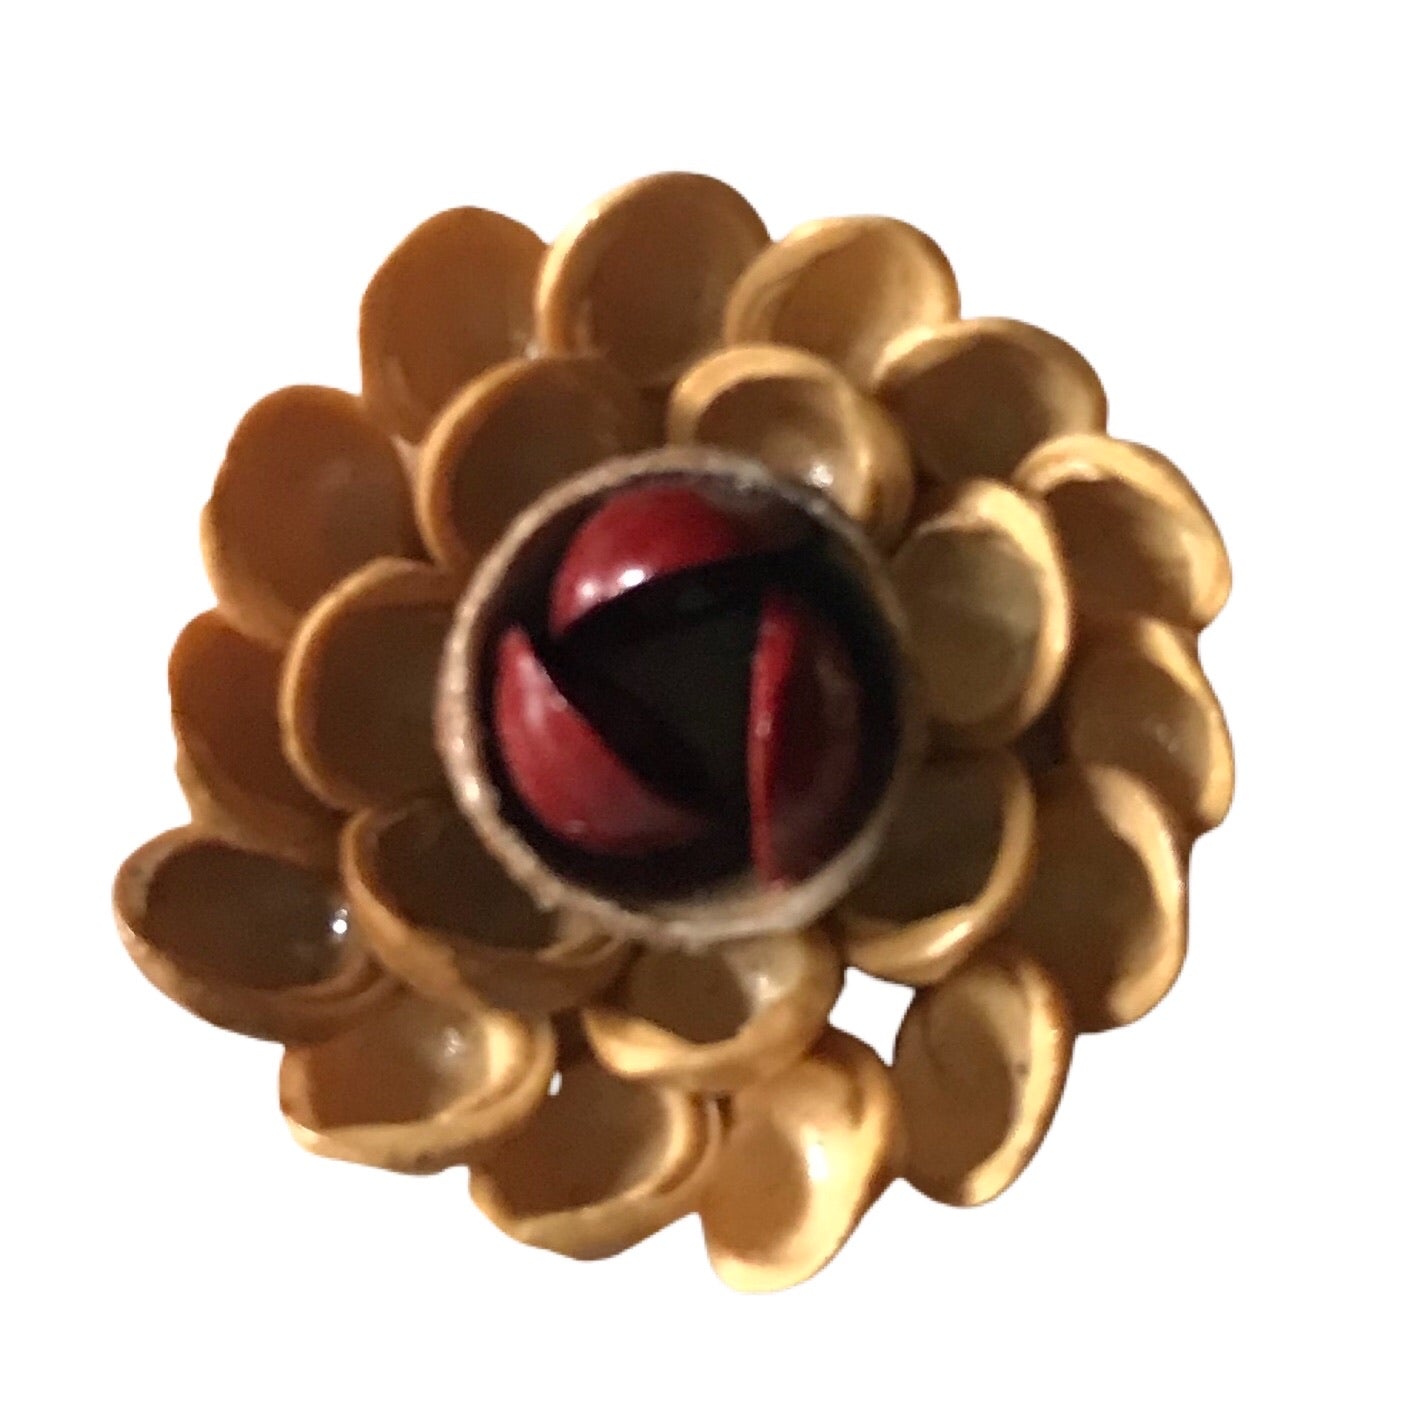 Lacquered Tan and Red Flower Brooch of Shells circa 1950s